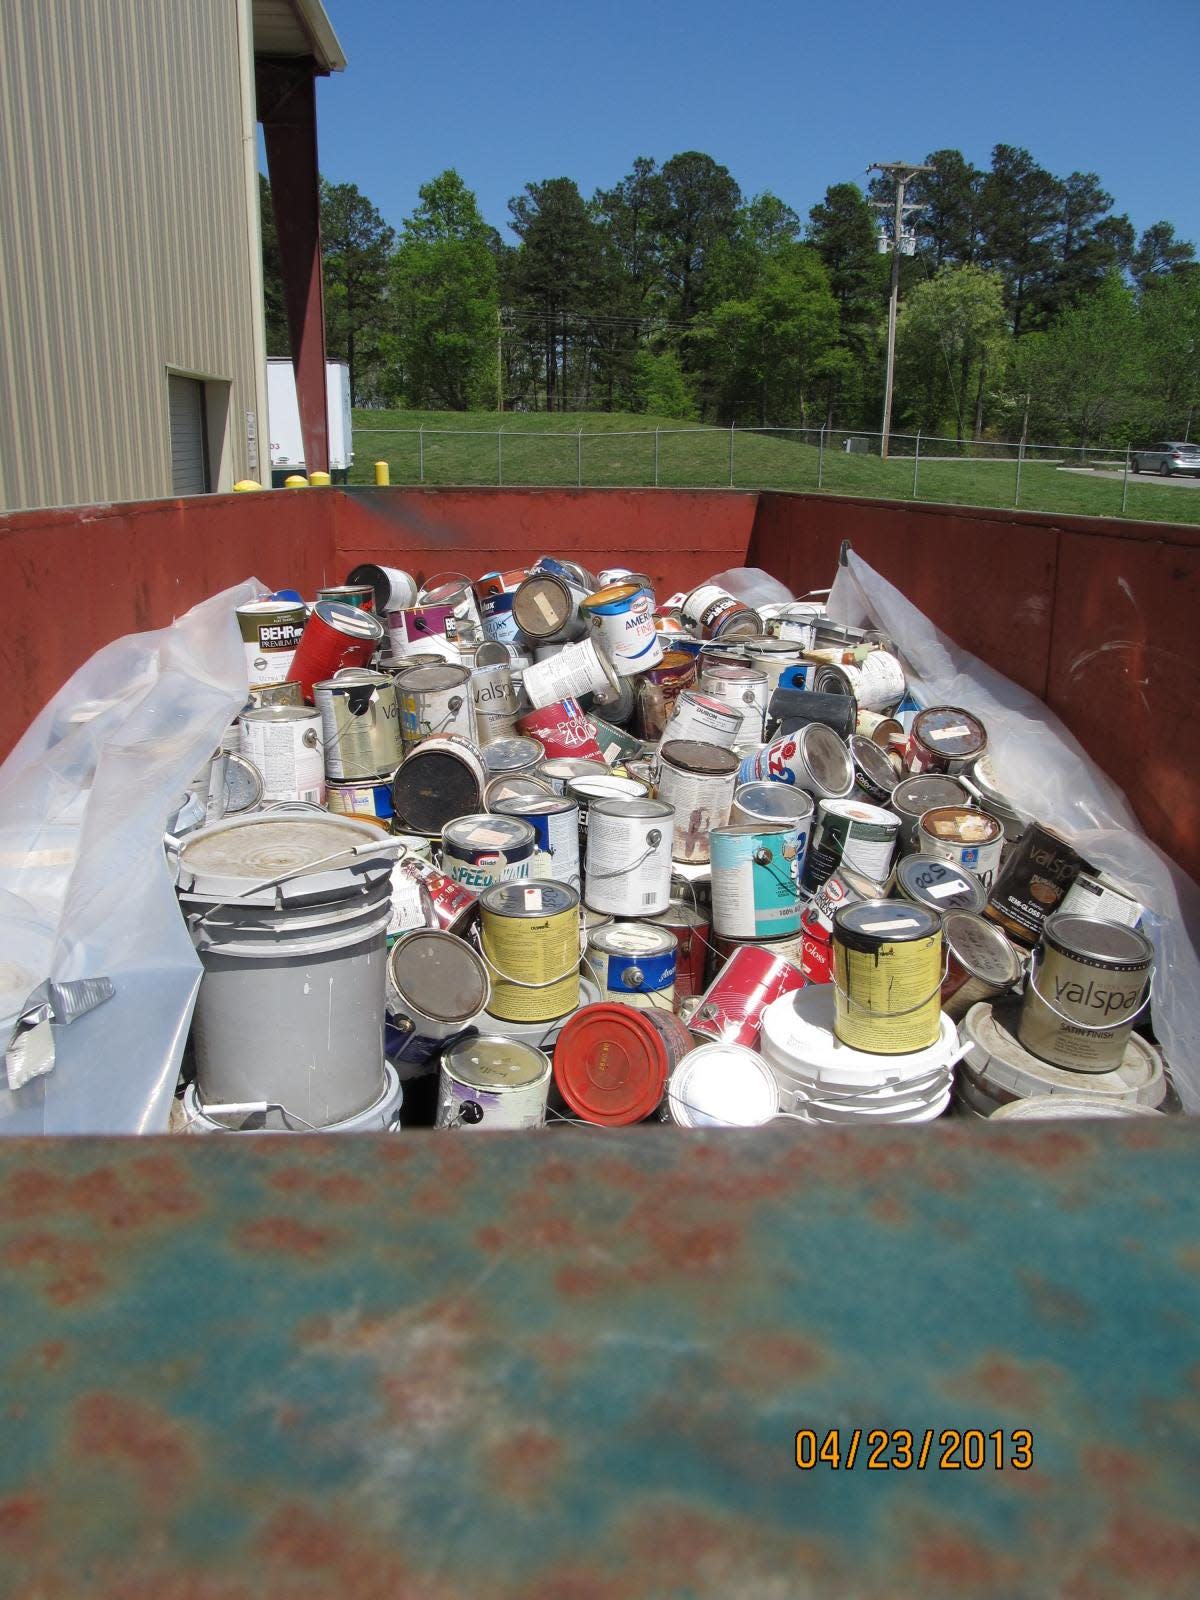 Pictured are paint cans collected by Gaston County during one of its Household Hazardous Waste events.